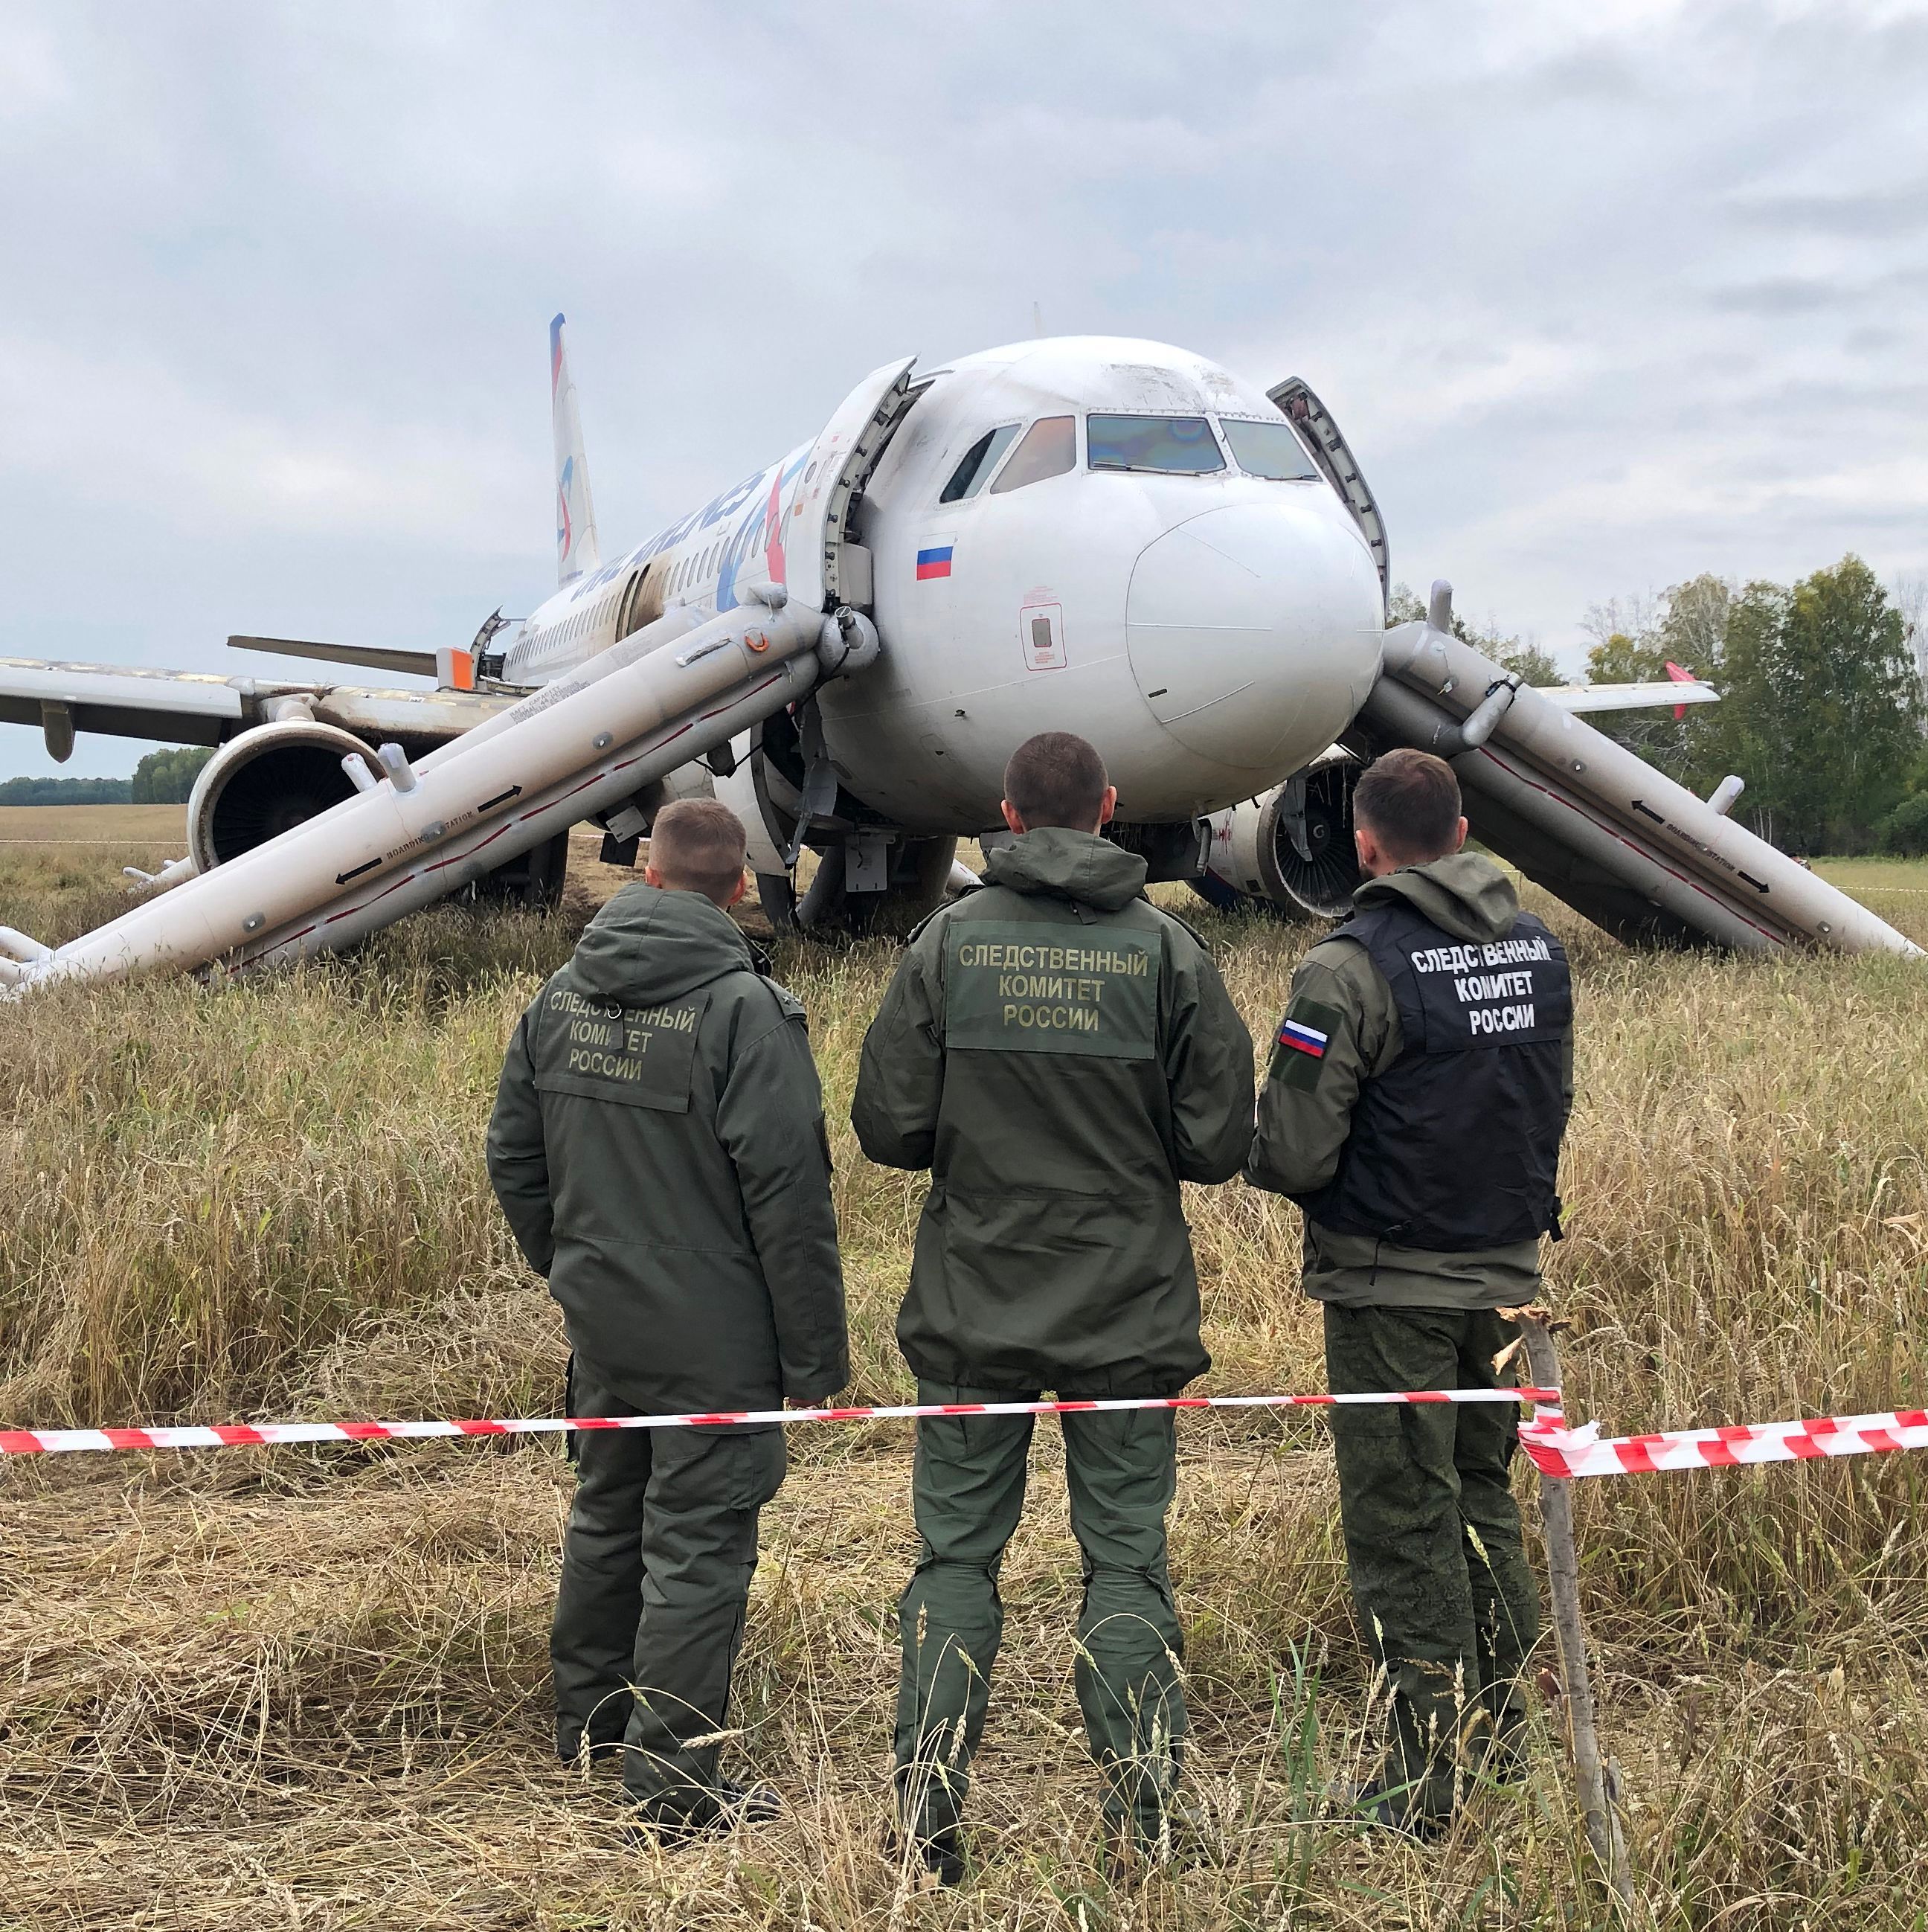 A Russian Airliner Landed In a Siberian Wheat Field. Now, Can It Get Back Up?